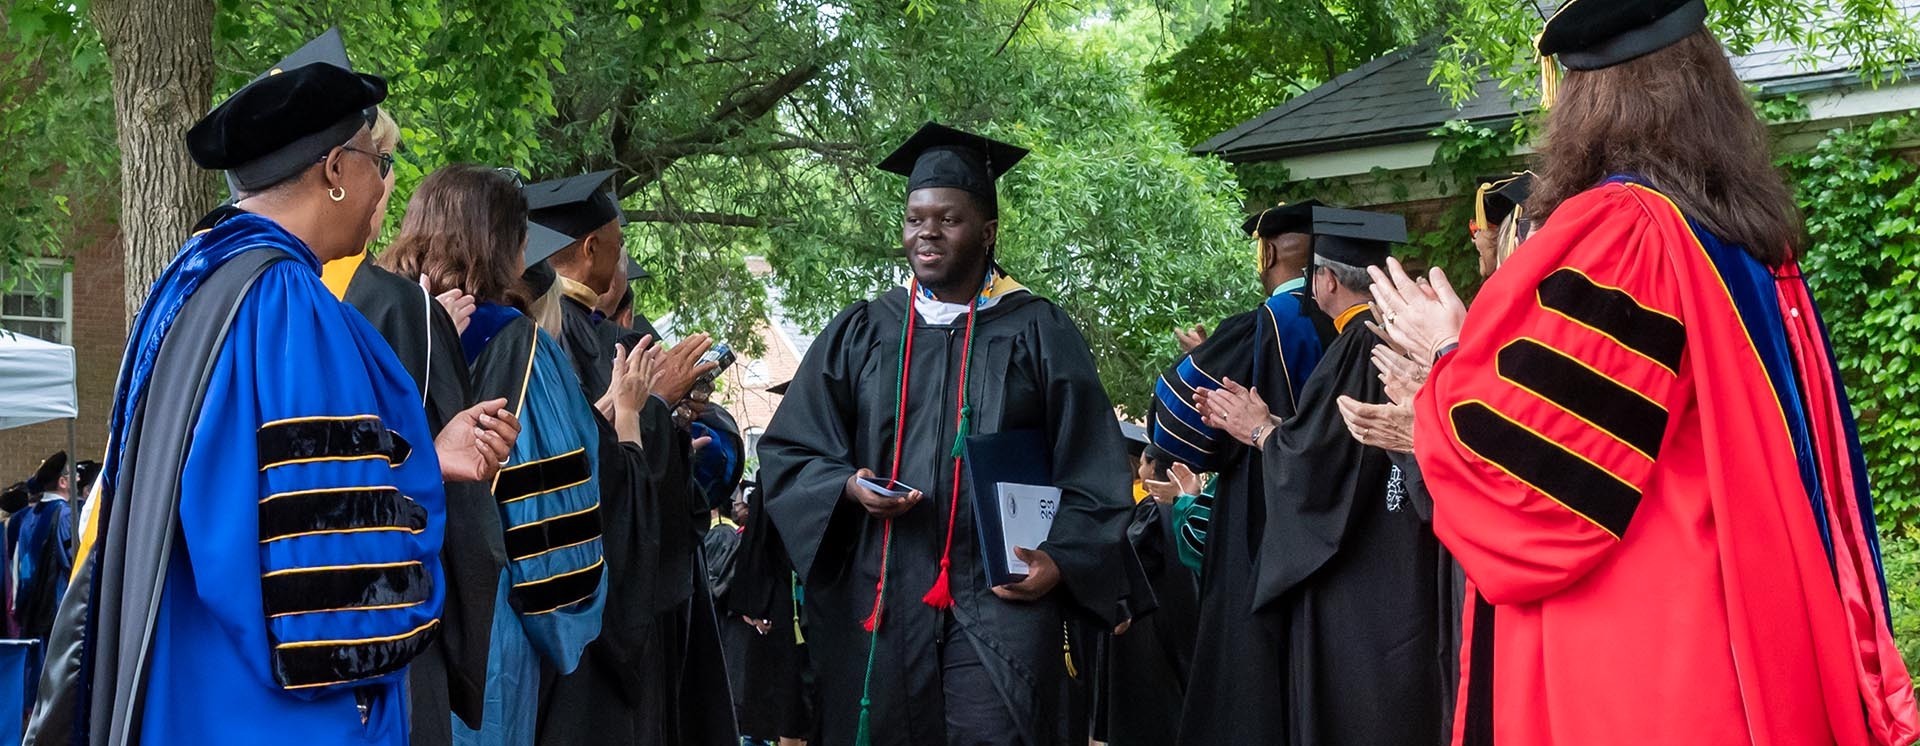 A graduate walks through the receiving line with the president, board and faculty clapping their hands congratulating him.